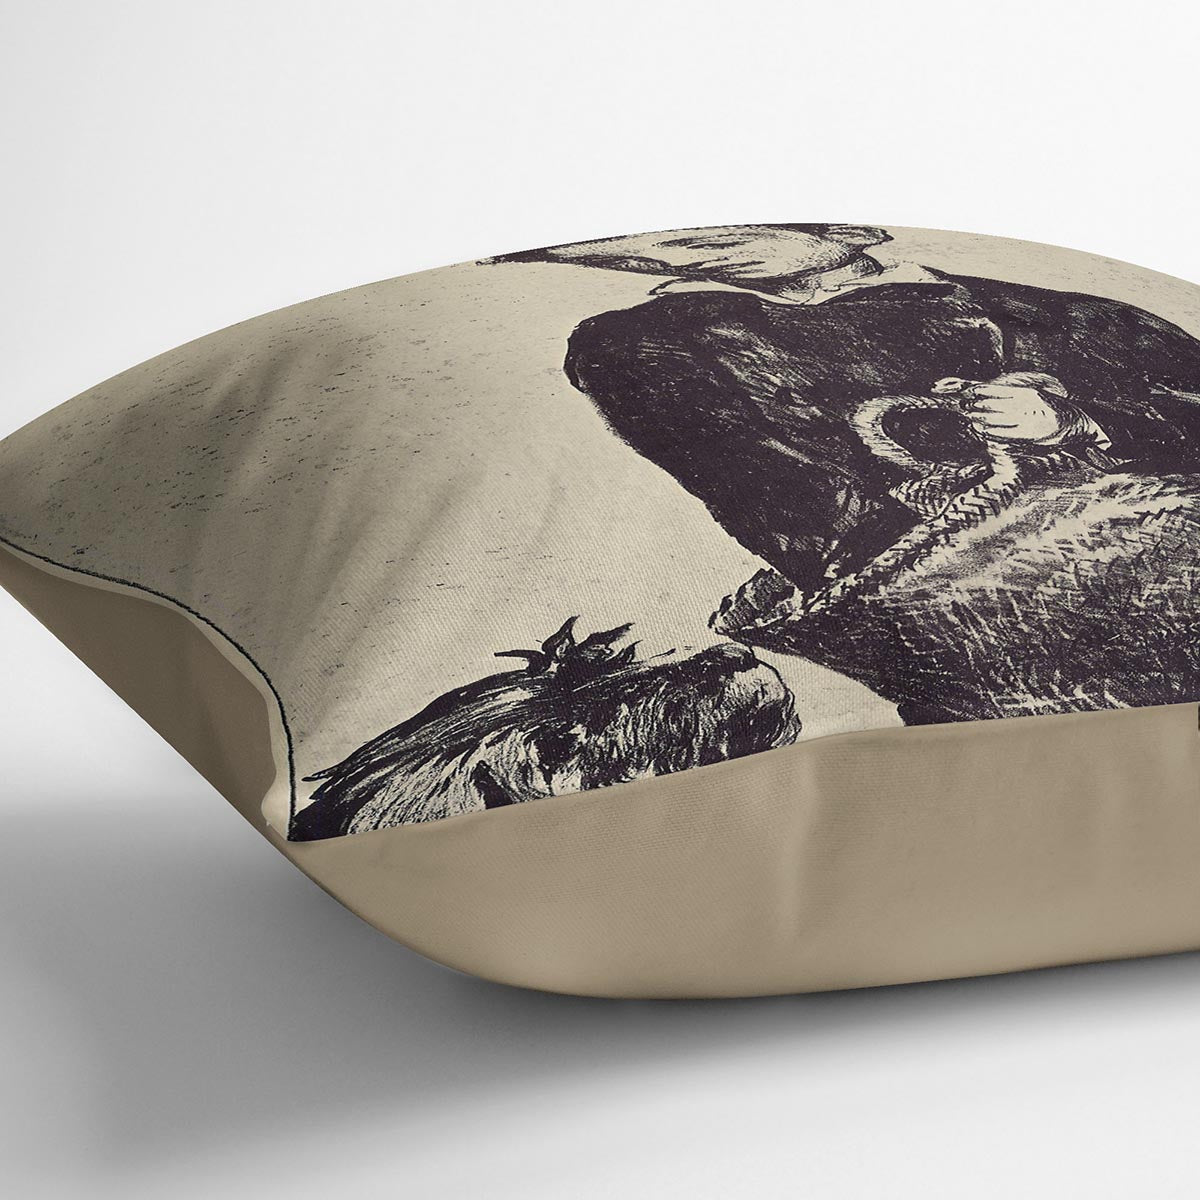 The urchin by Manet Cushion